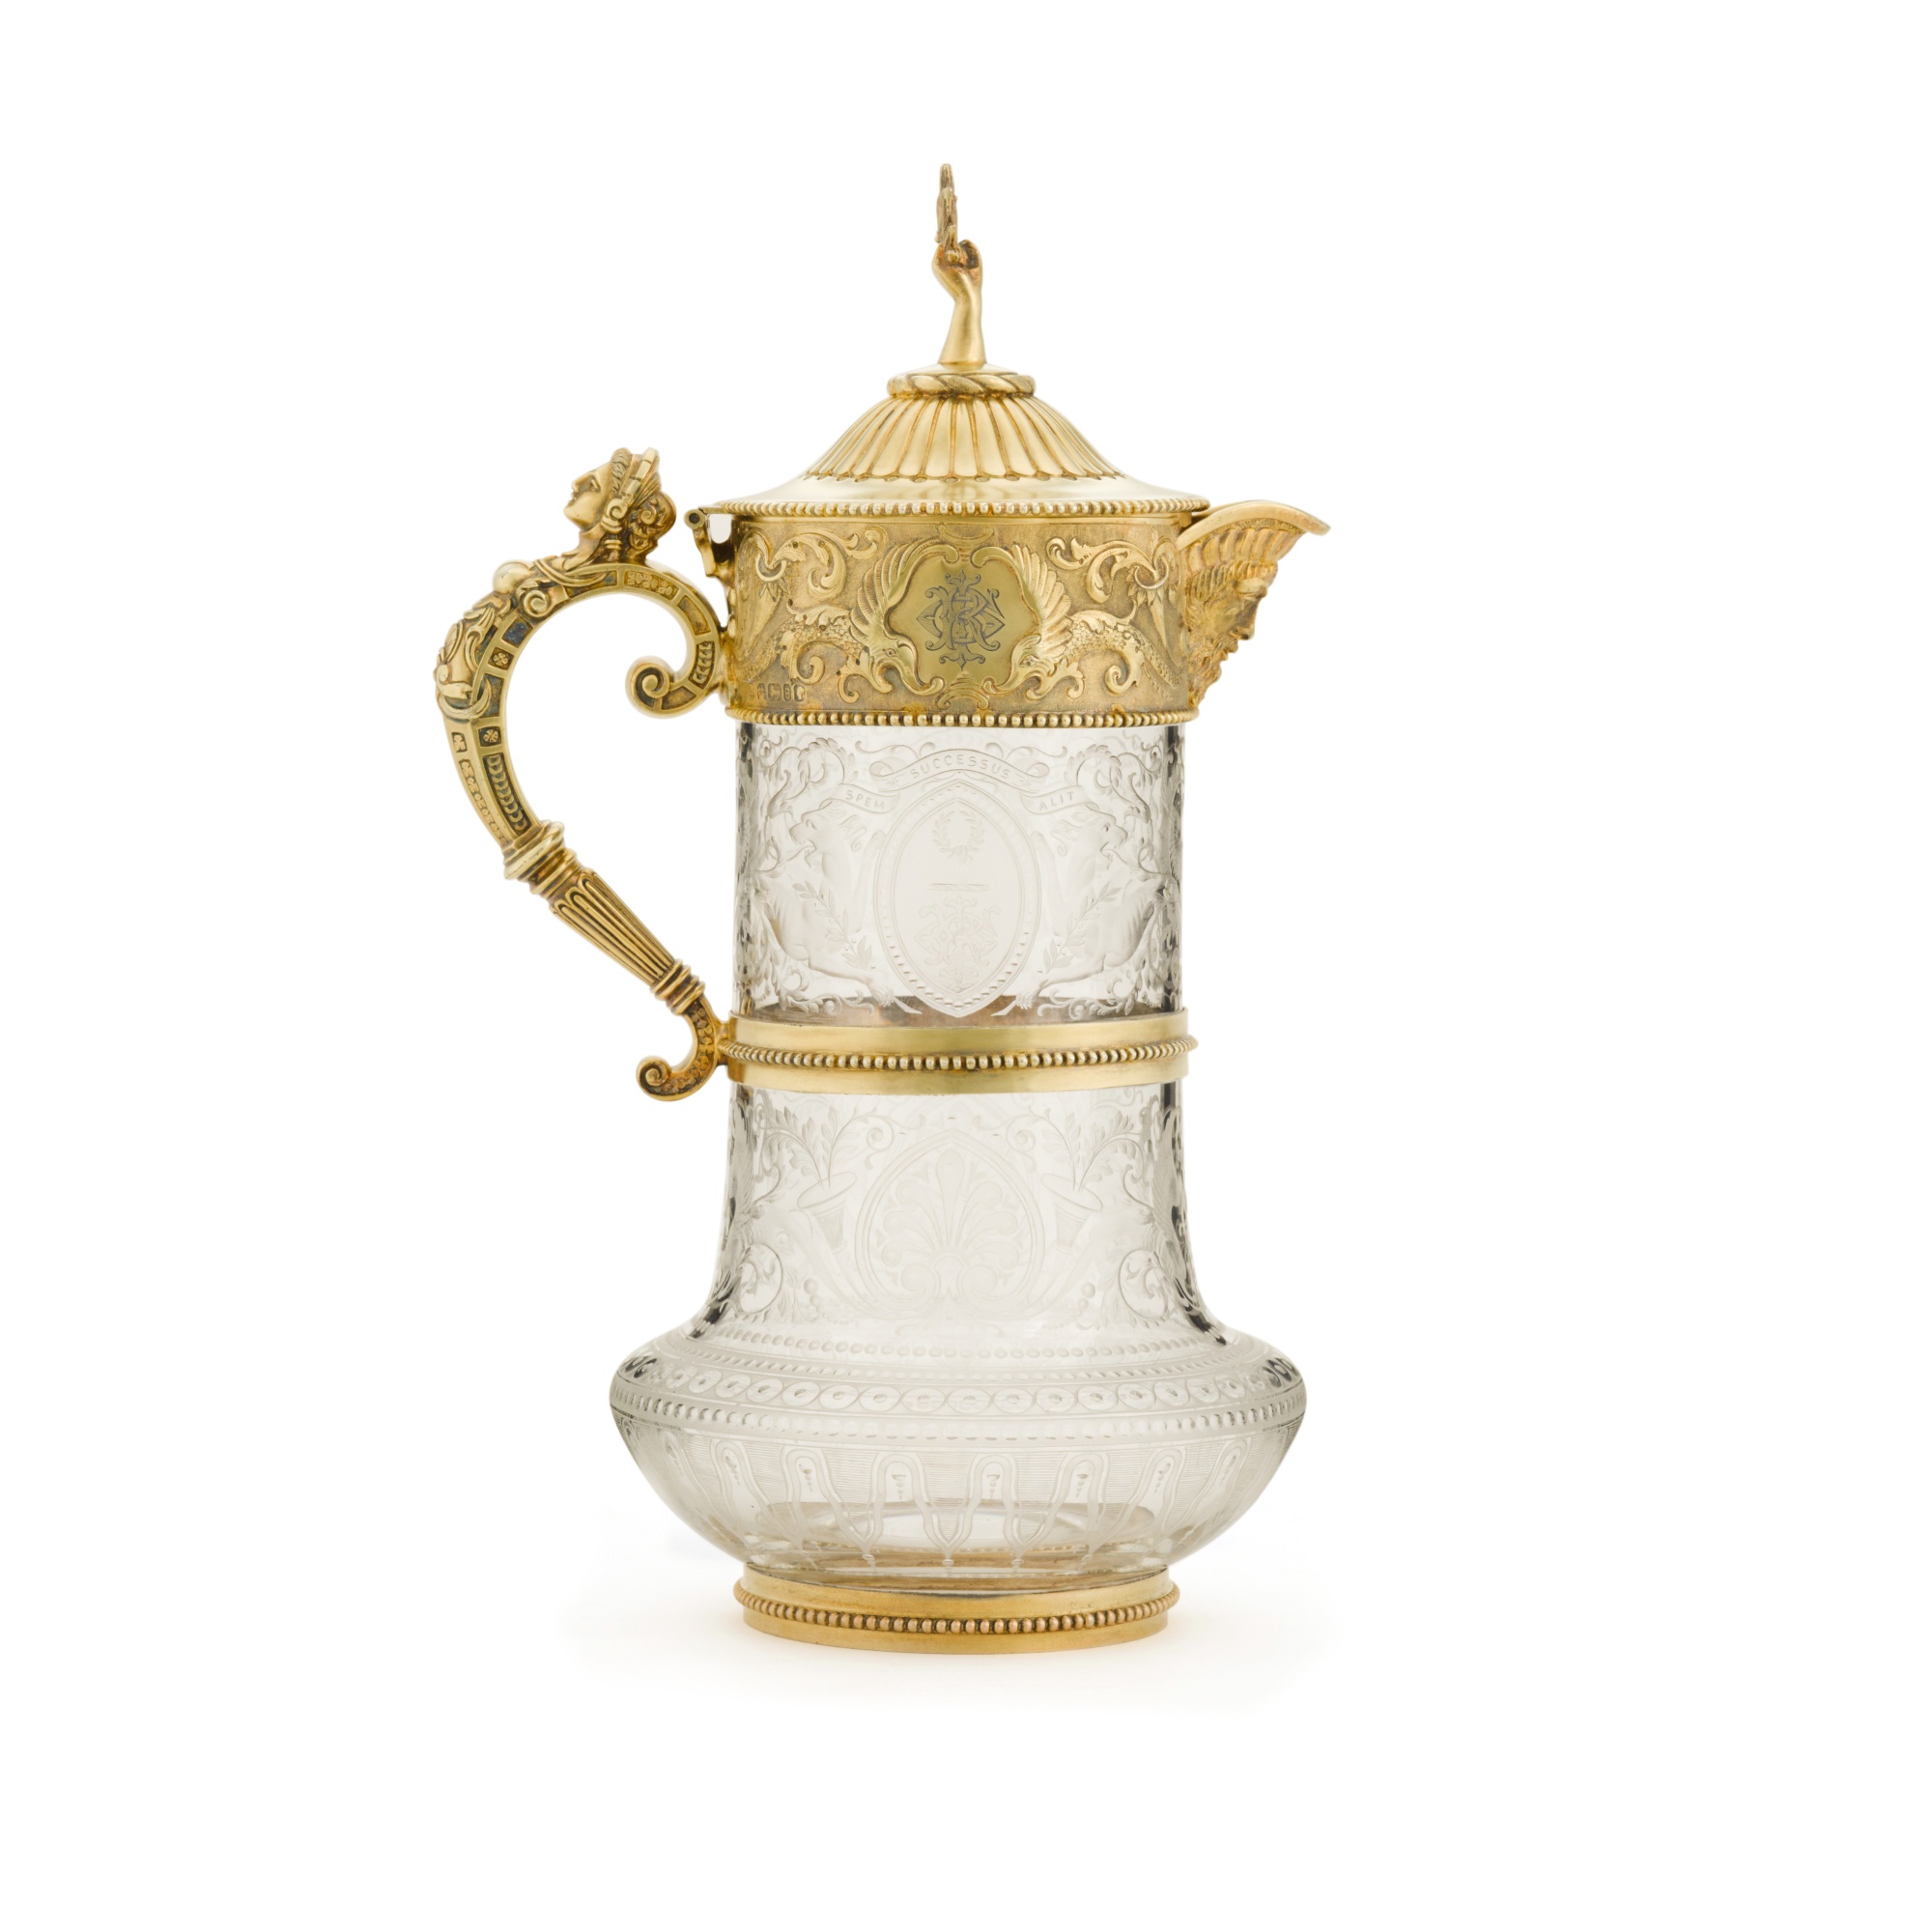 A Victorian silver-gilt-mounted glass claret jug, William & George Sissons, Sheffield, 1869 - Image 2 of 5